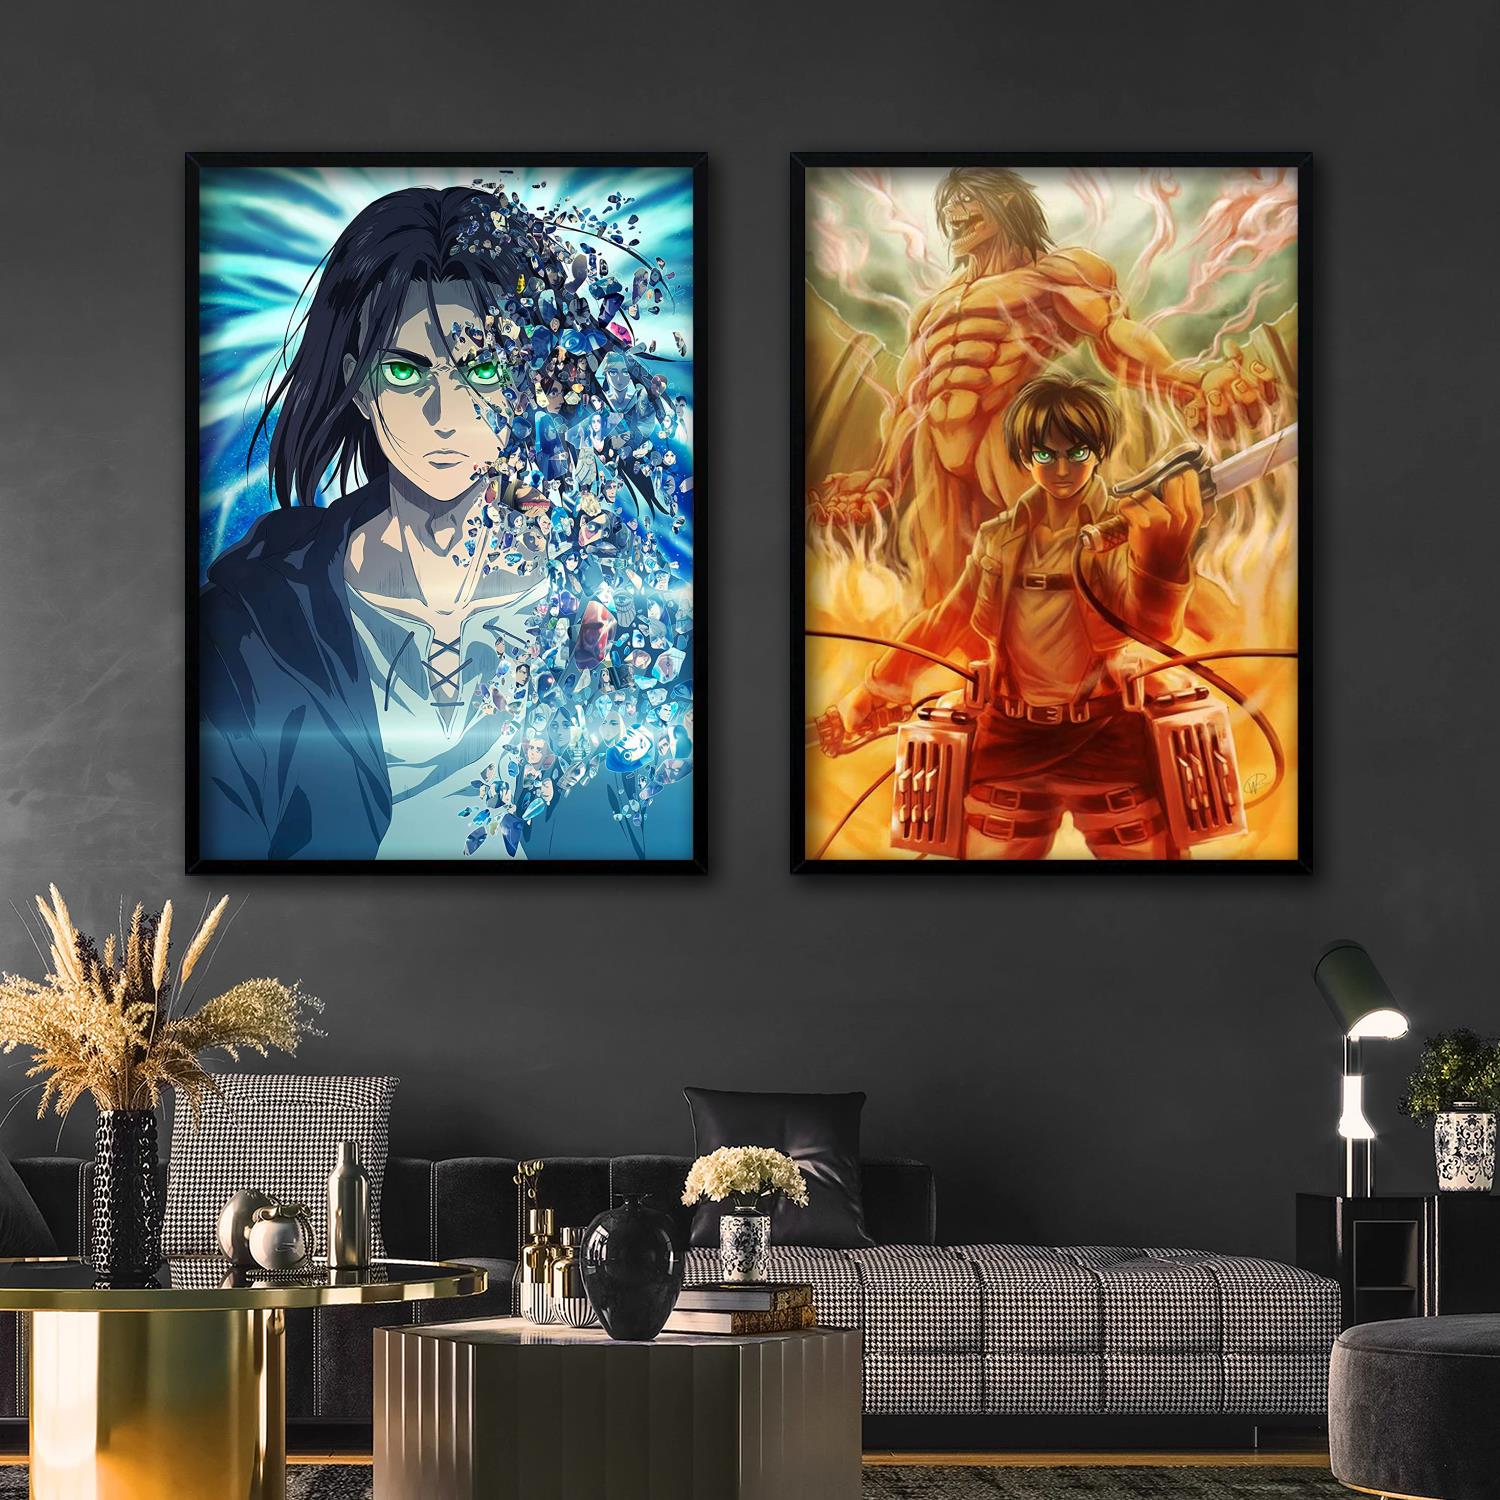 manga plus attack on titan poster Decorative Painting Canvas 24x36 Poster Wall Art Living Room Posters - Attack On Titan Plush